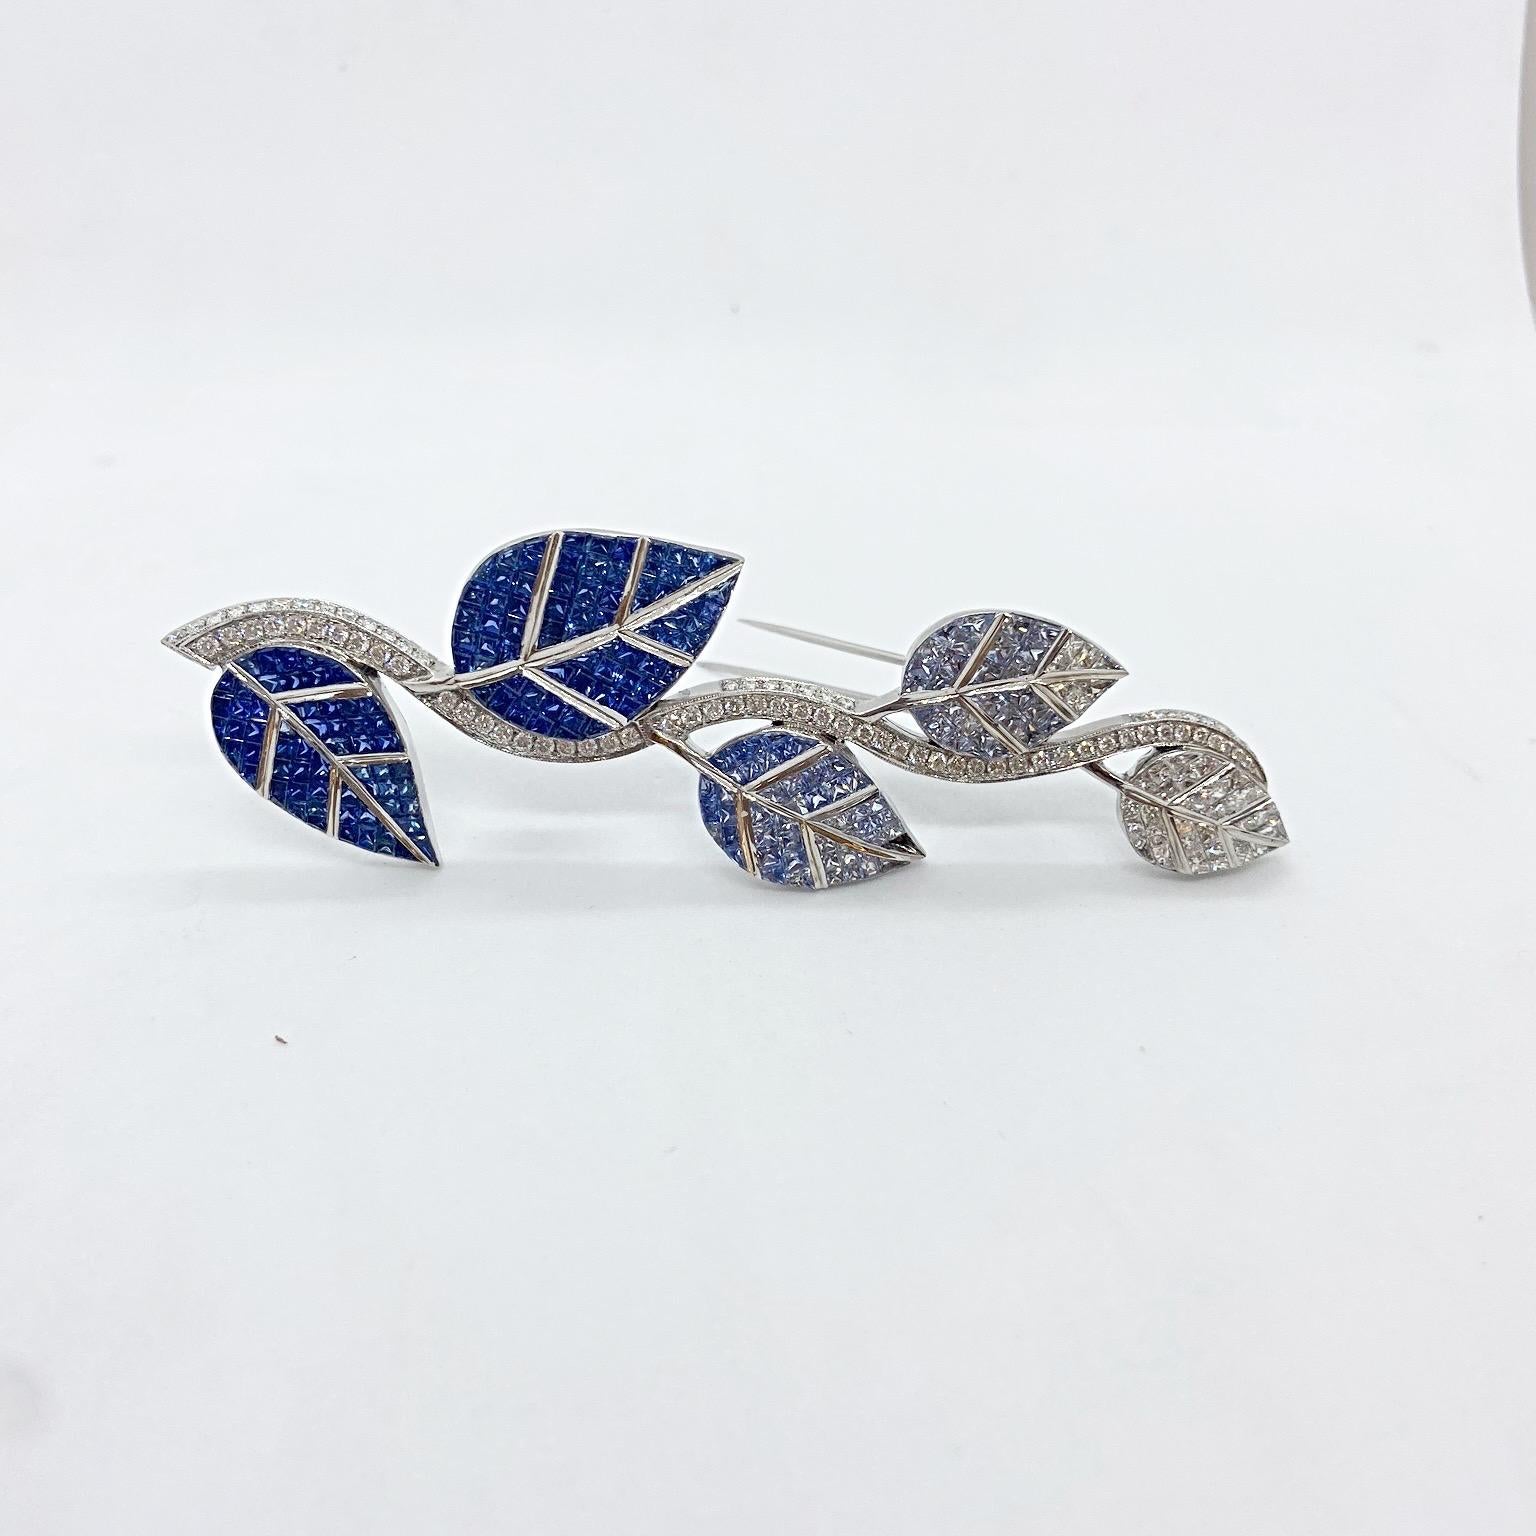 An extraordinary set 18 karat white gold , Diamond and Blue Sapphire leaf brooch. Each of the five leaves are invisibly set with Princess Cut stones. The top leaf starts in all white Diamonds slowly following to shaded colors of Blue Sapphires . The